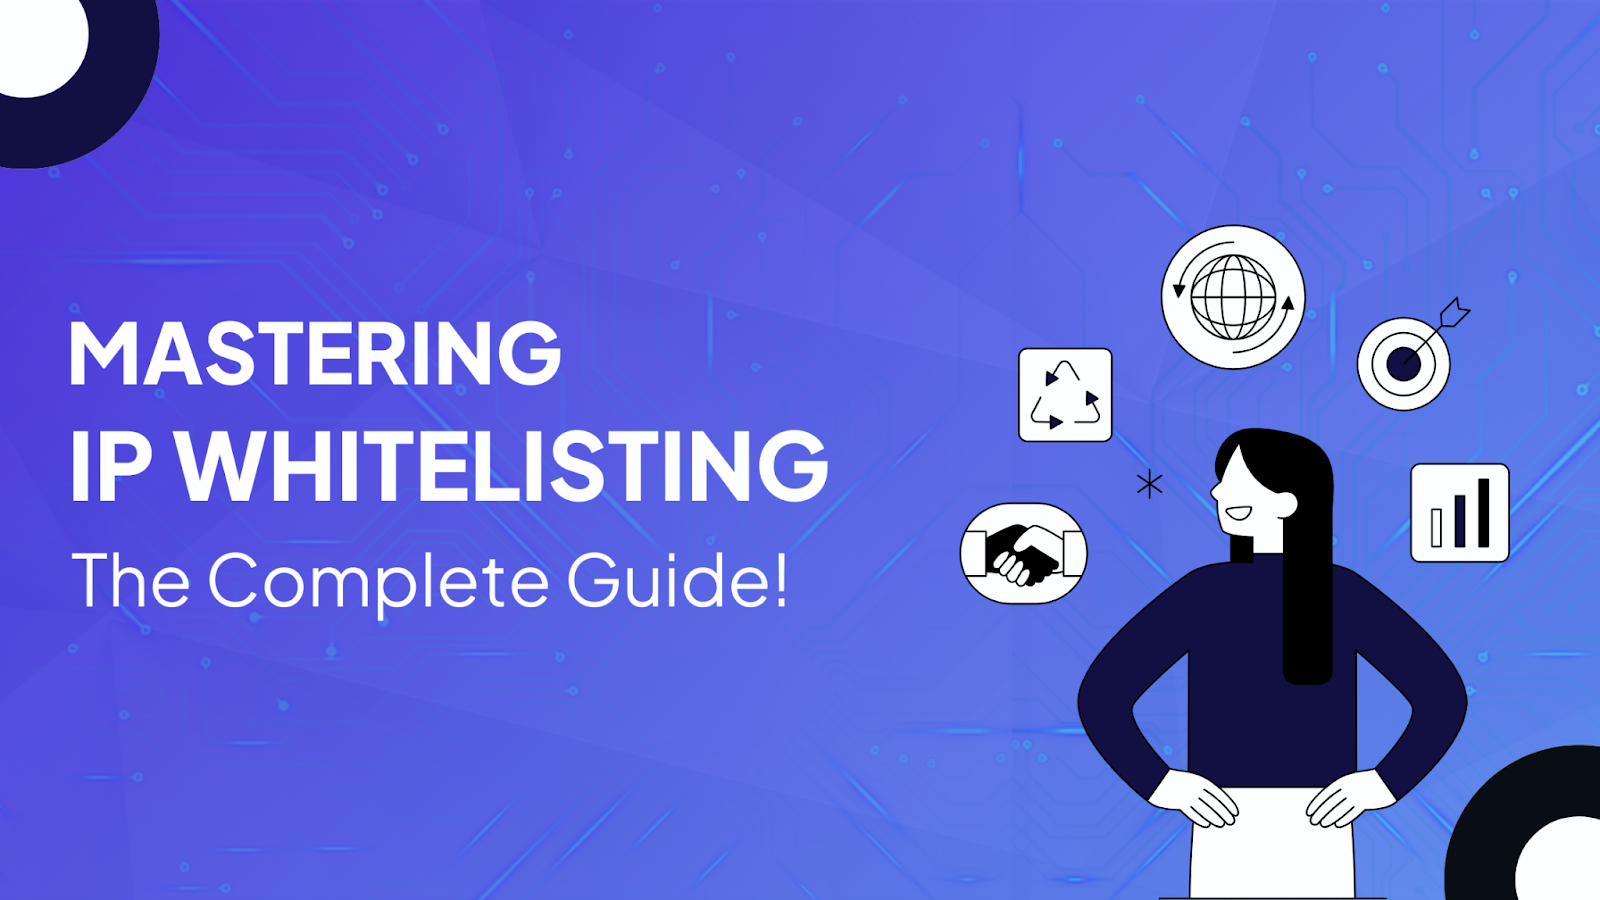 Step by step guide to IP Whitelisting